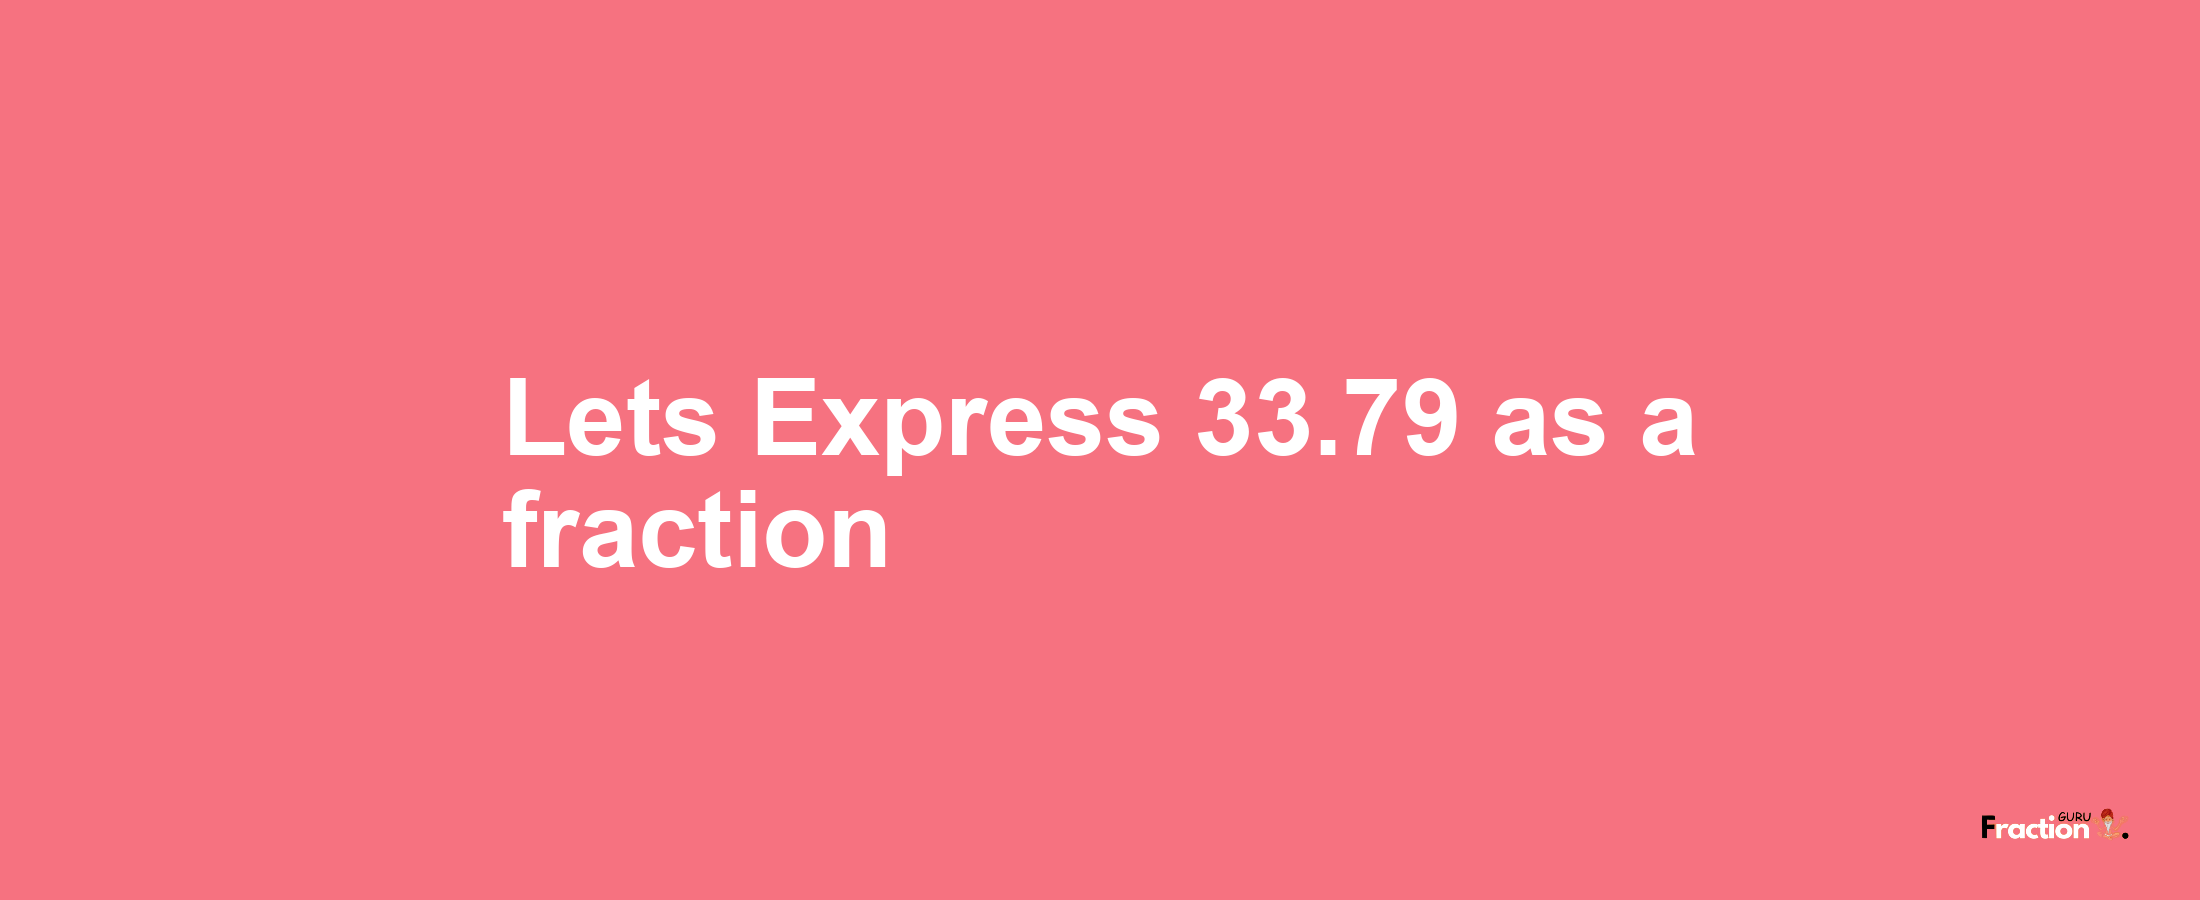 Lets Express 33.79 as afraction